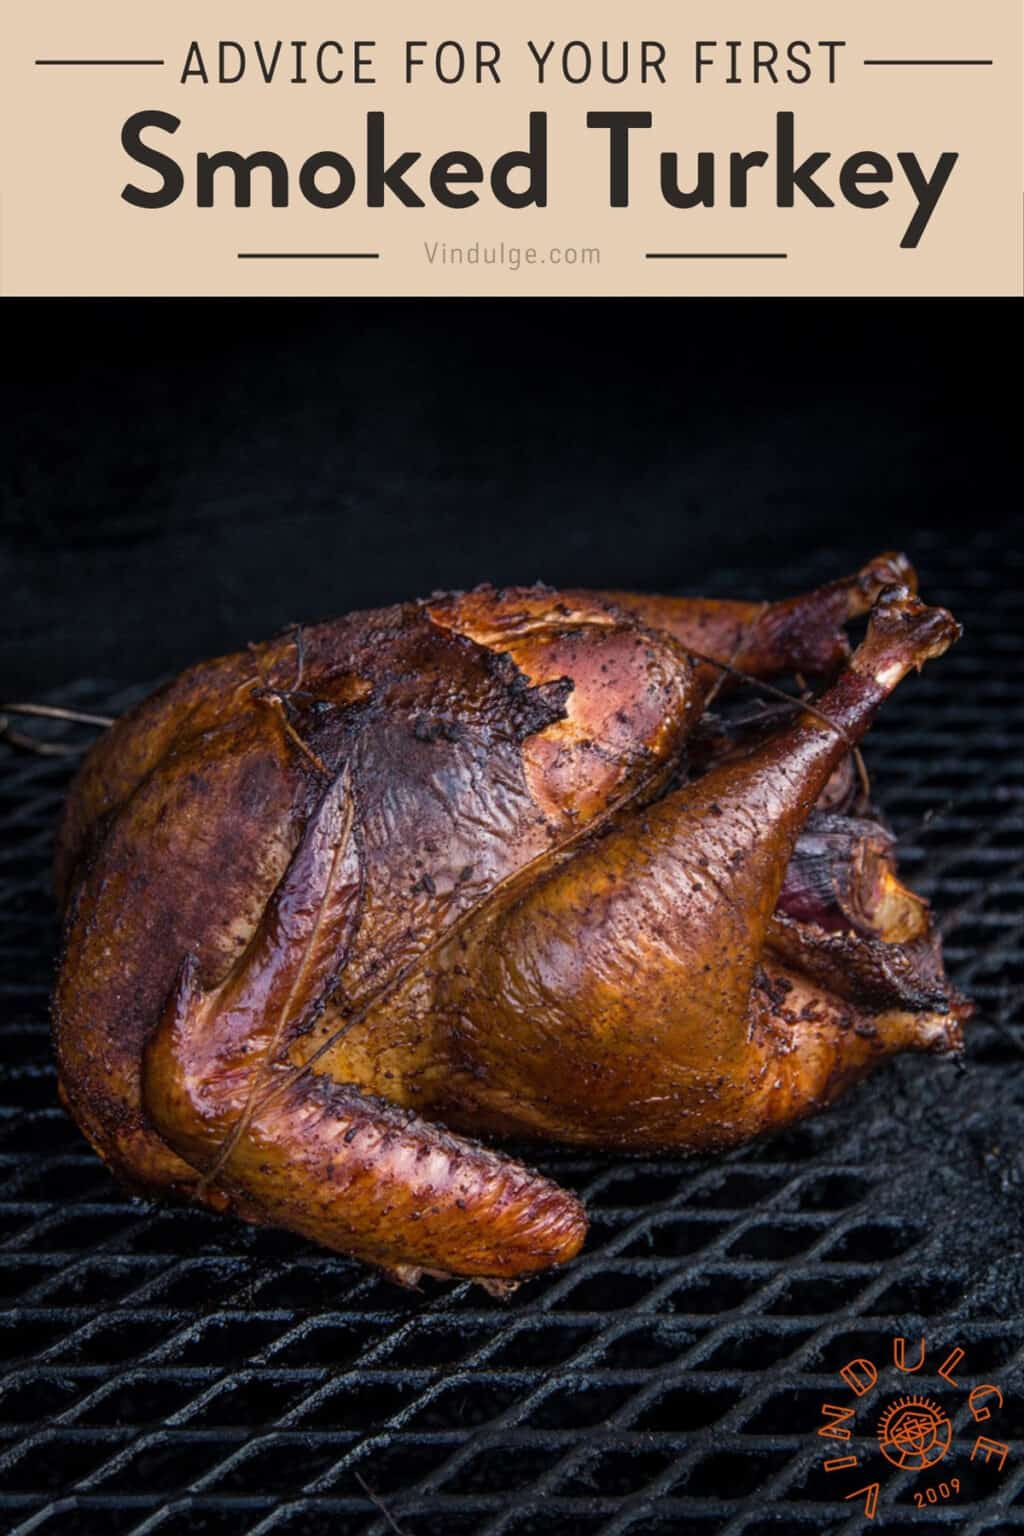 Your First Smoked Turkey – Advice from the Pros and Joes - Vindulge